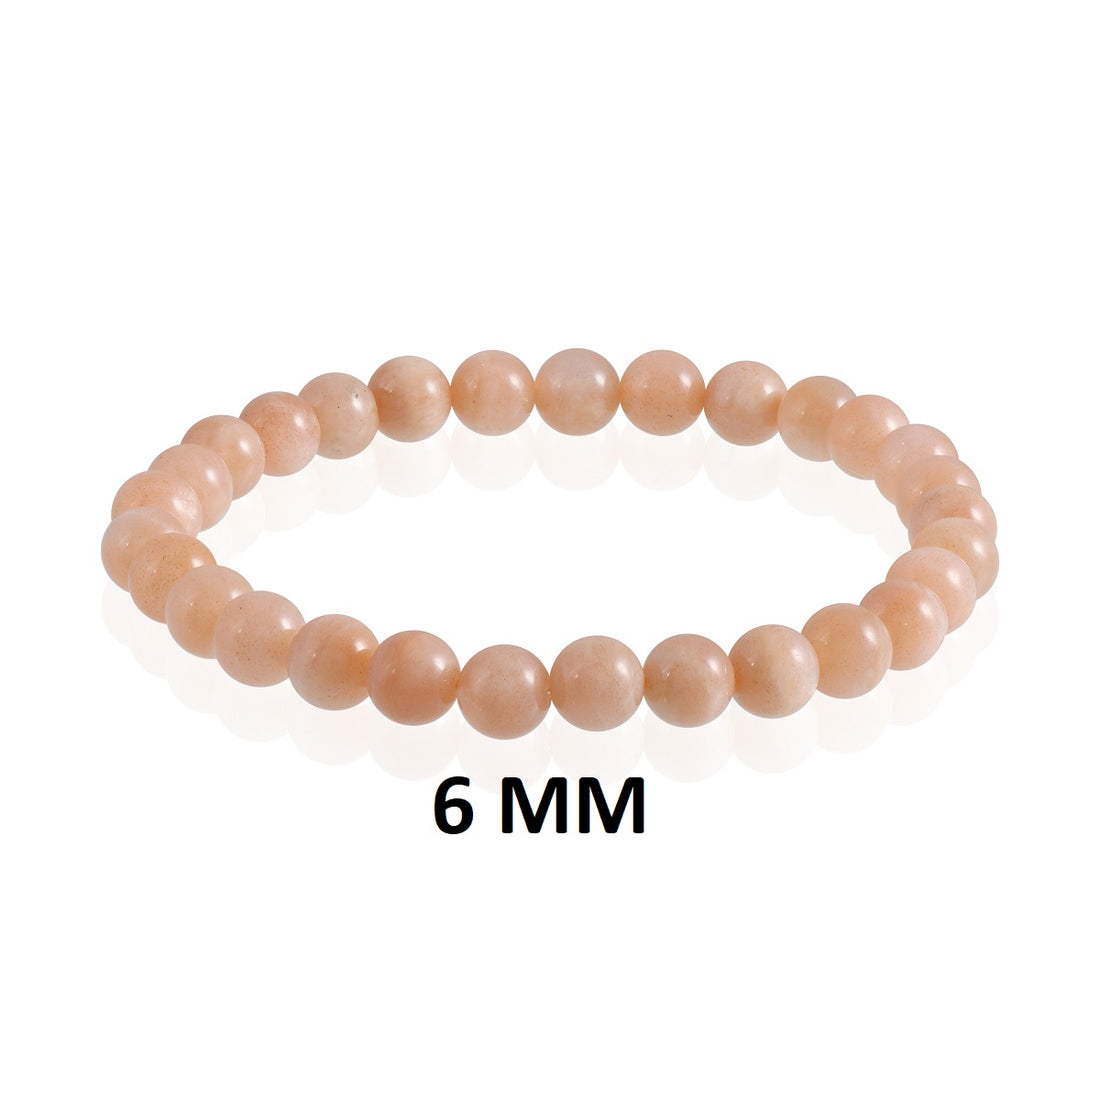 Artistic representation symbolizing emotional balance, featuring the Peach Moonstone Bracelet as a source of calmness and stability